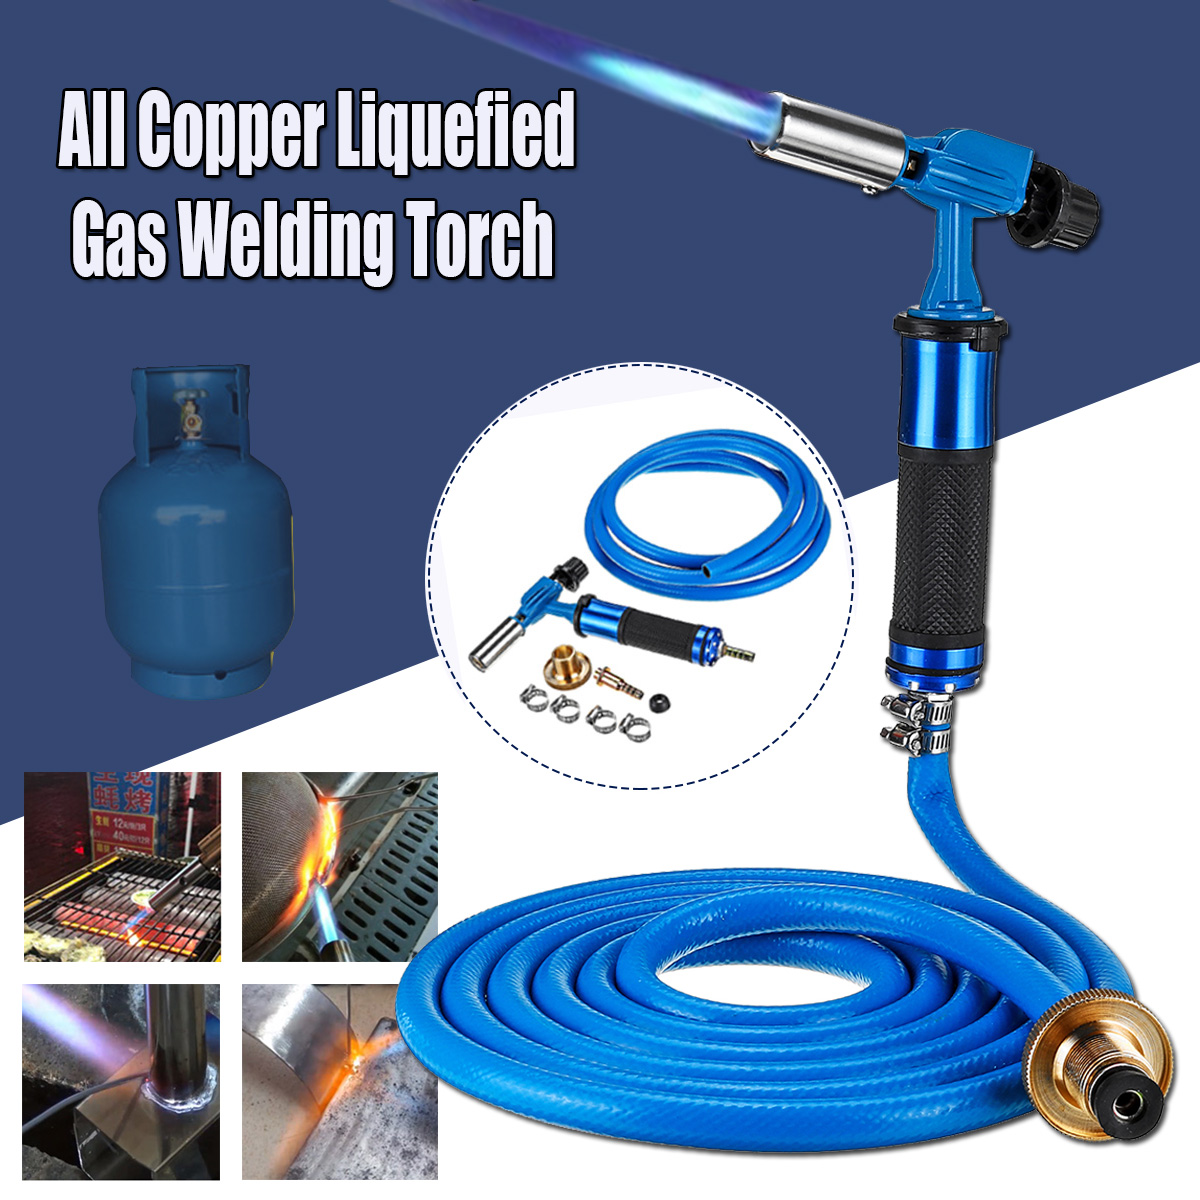 YRQ Electronic Ignition Liquefied Gas Welding Torch Kit with Hose for Soldering Cooking Brazing Heating Lighting 